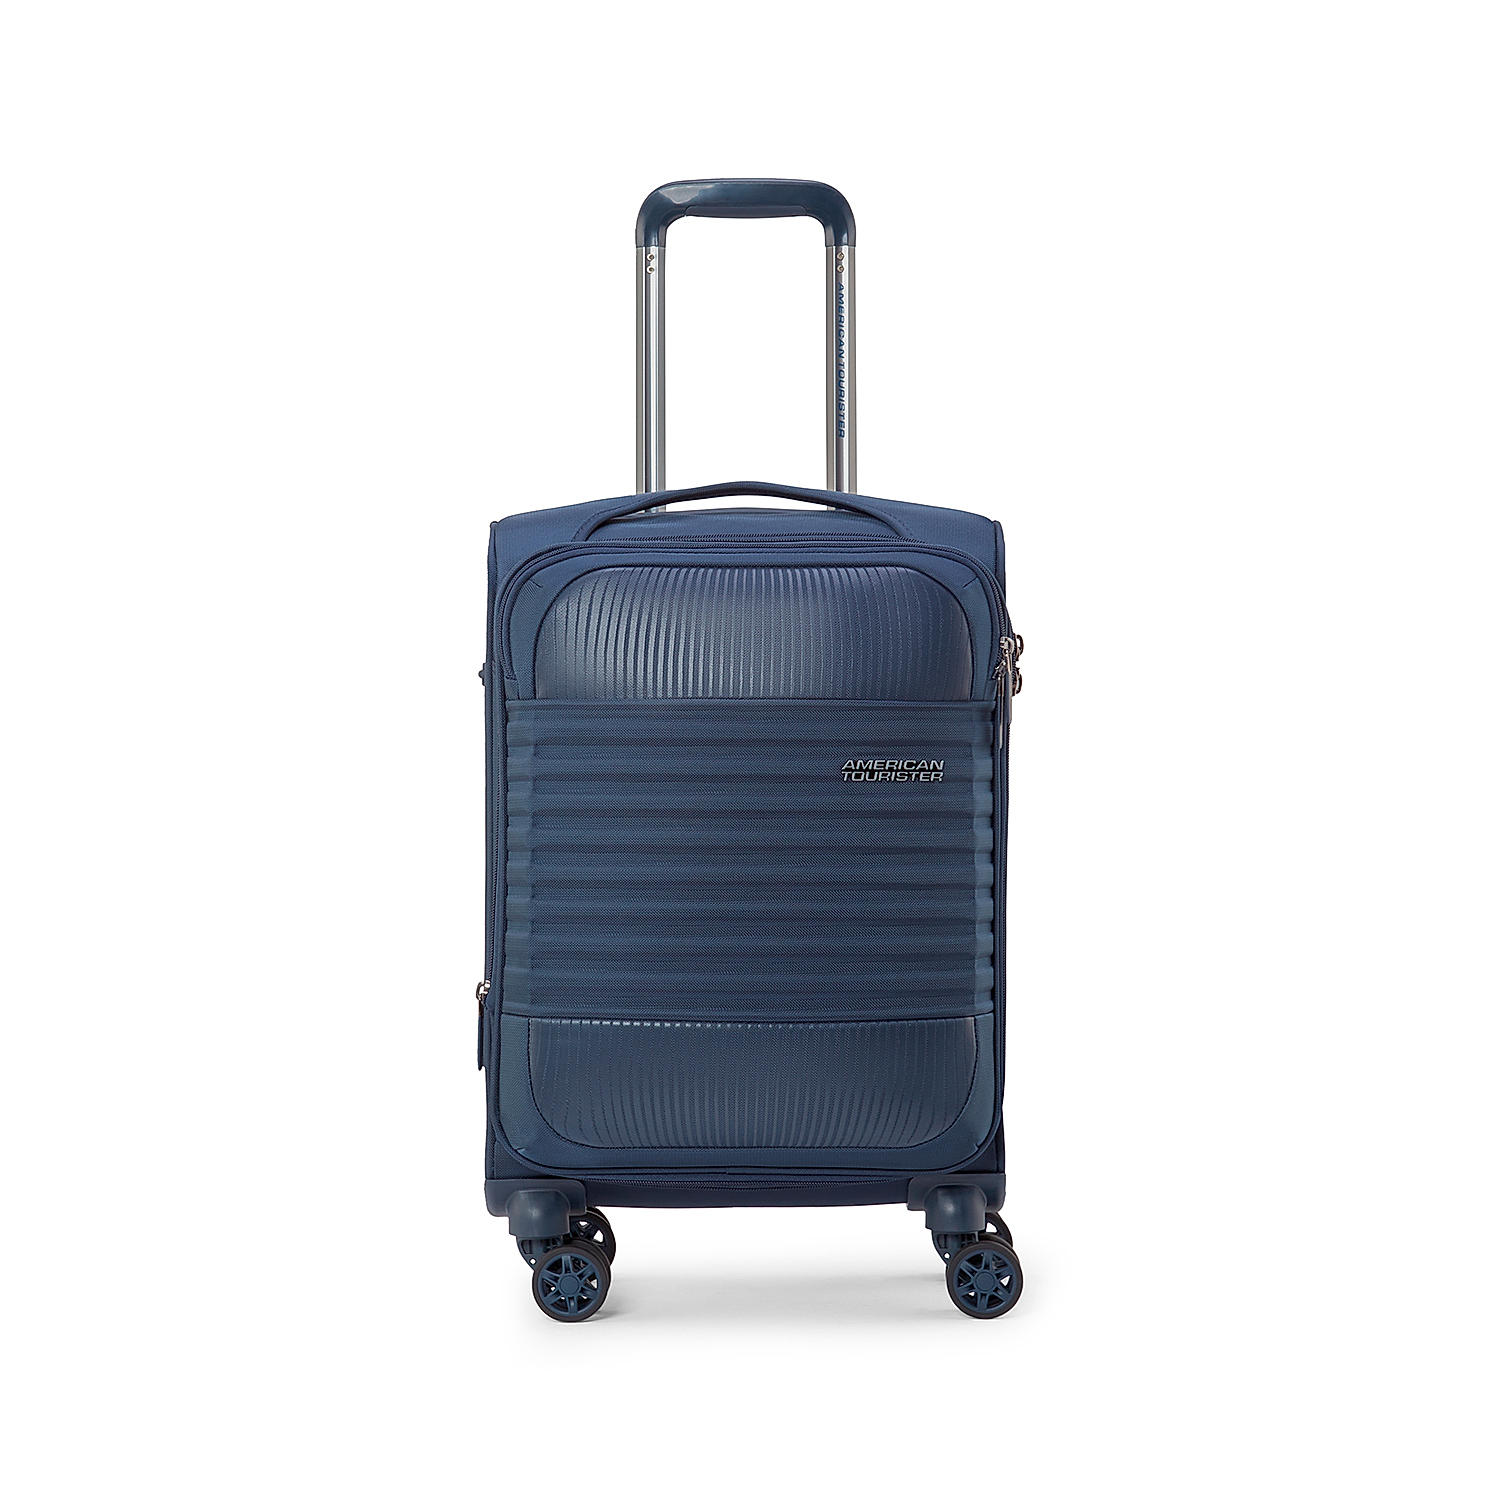 AMERICAN TOURISTER American Tourister Spinner 55 expandable carry-on s –  GALLERIA Bag&Luggage